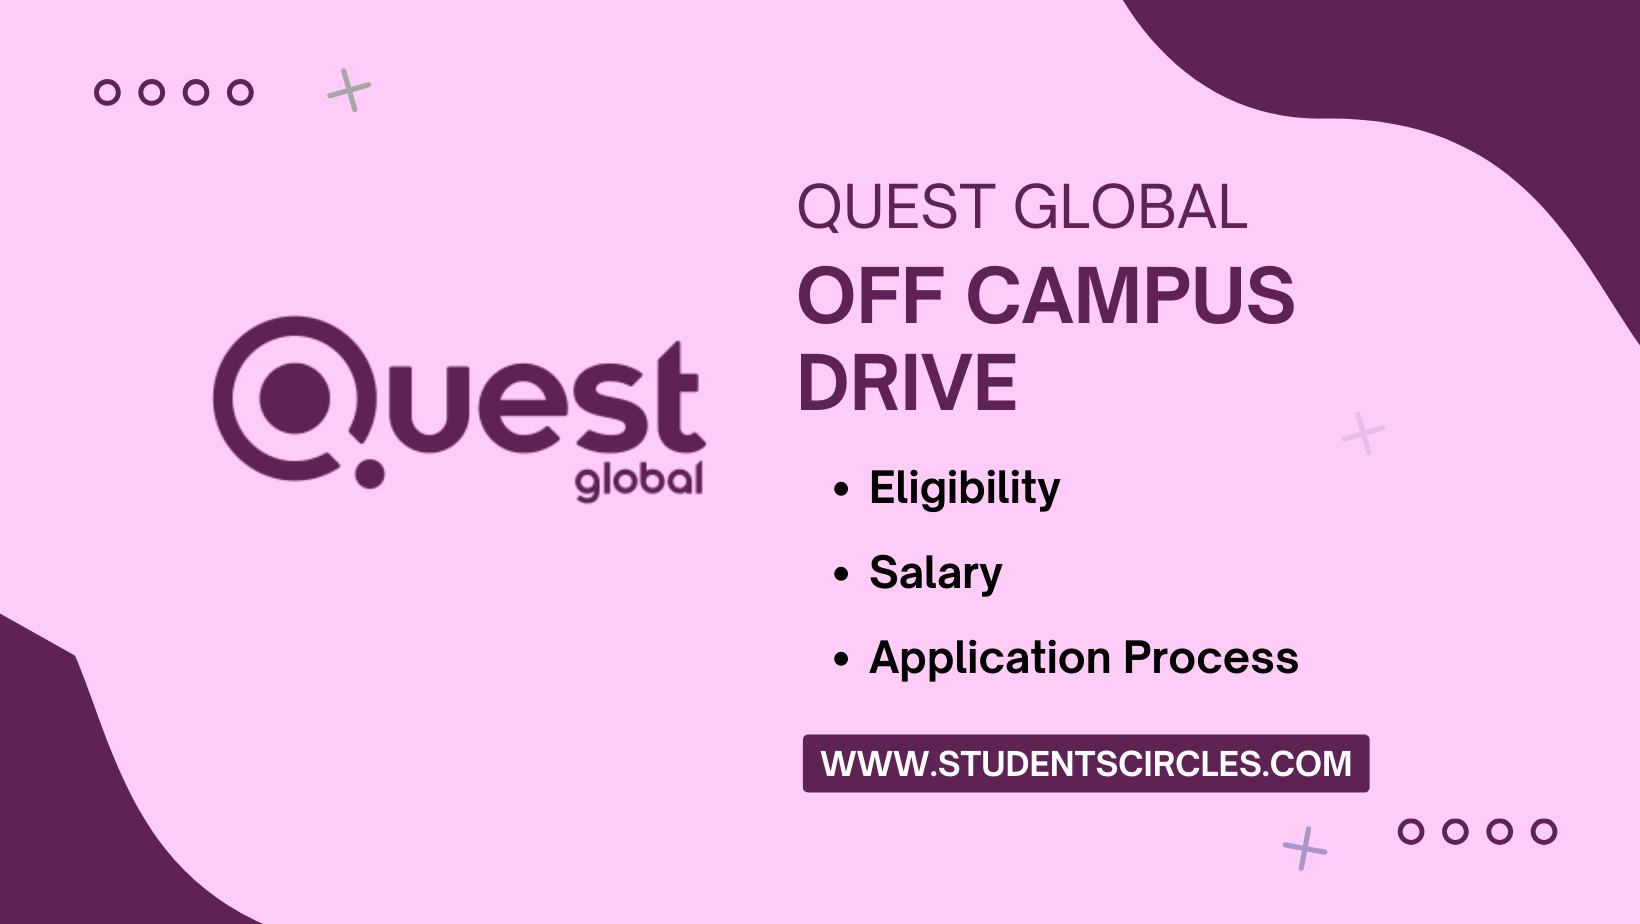 Quest Global Off Campus Drive